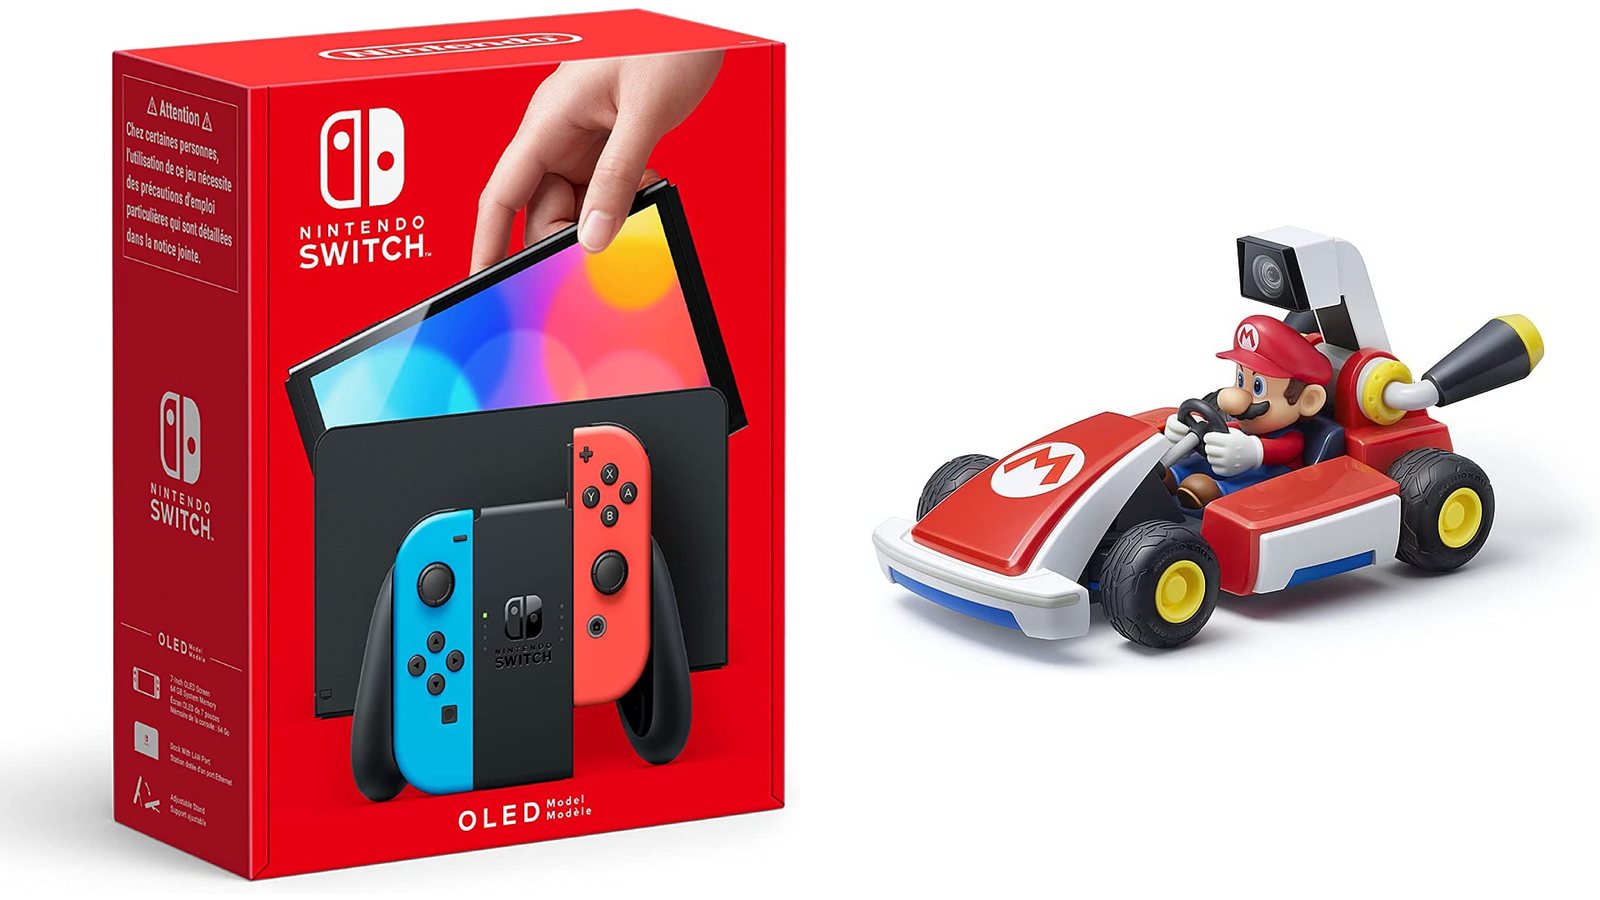 Mario Kart Live Home Circuit Review: Unique and magical